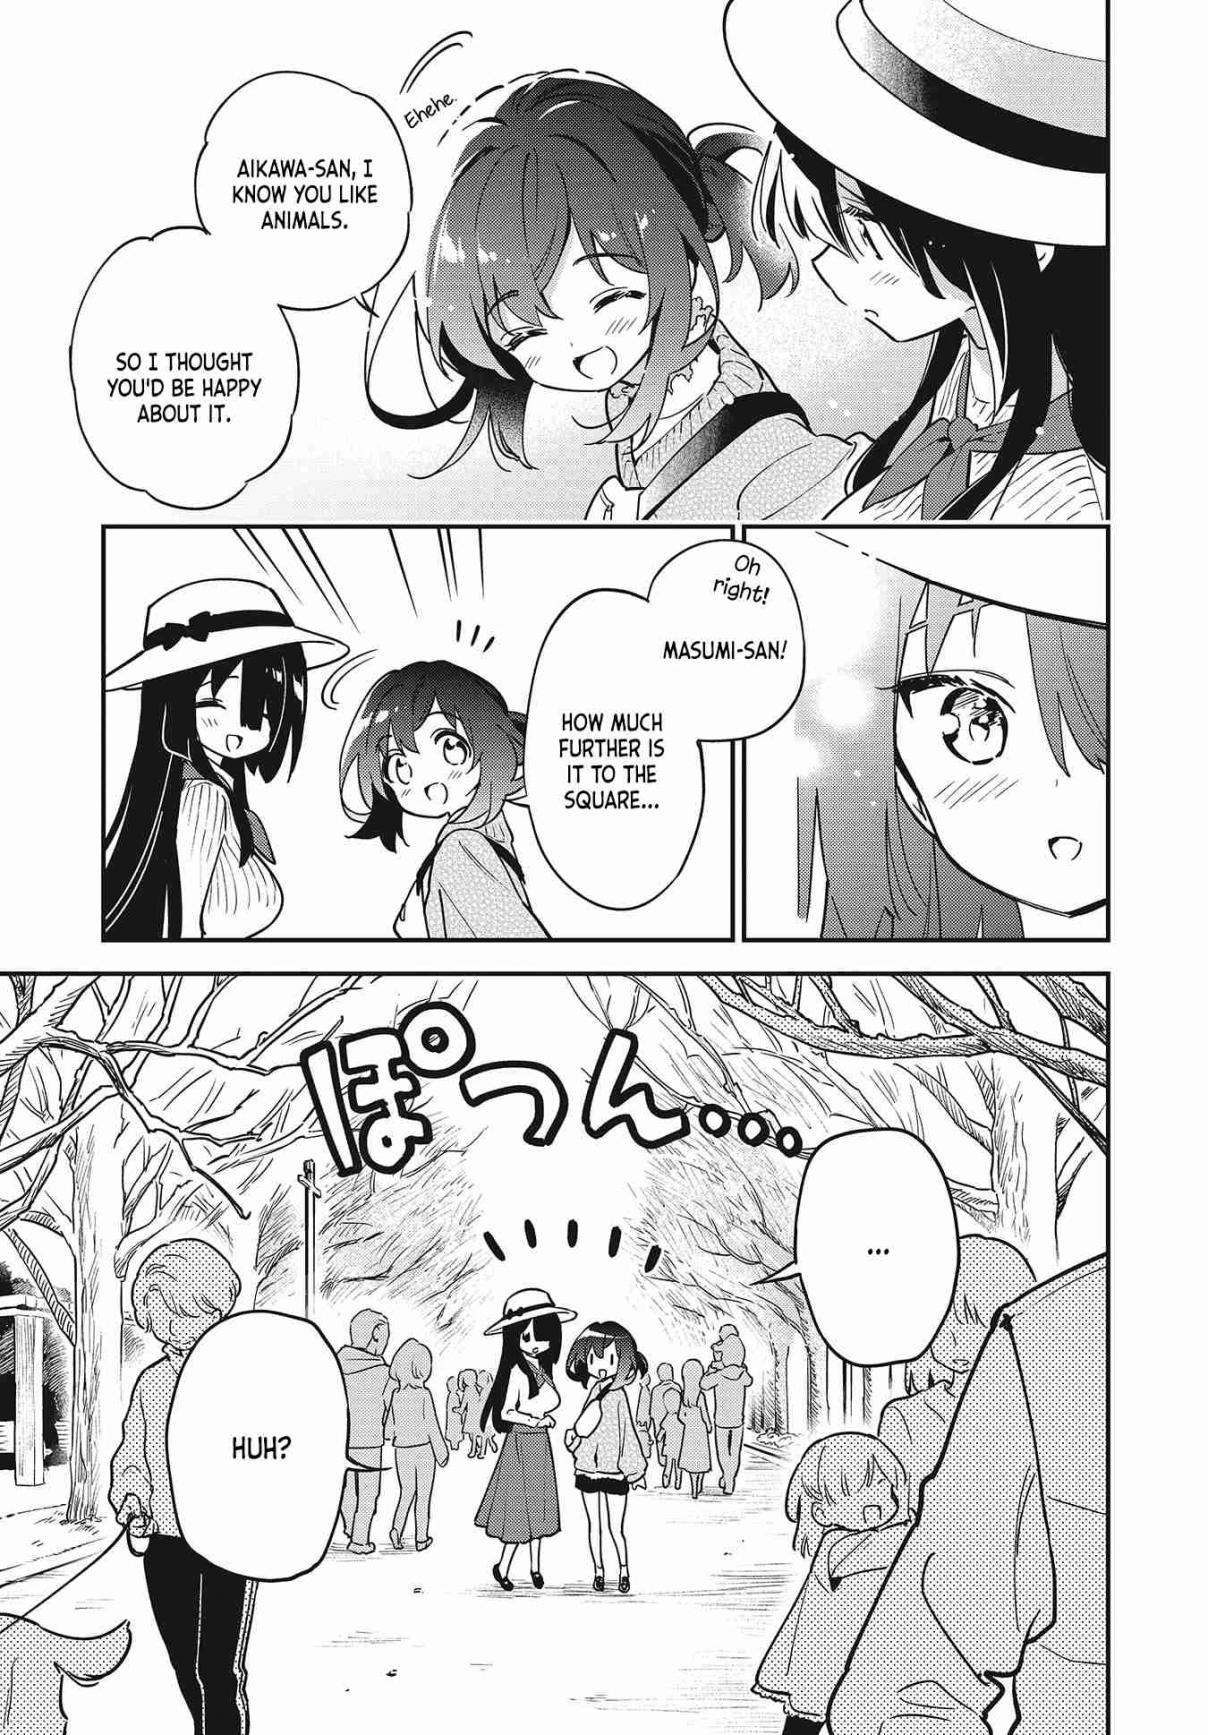 Chotto Ippai! Vol. 7 Ch. 43 A perfect day for flower viewing